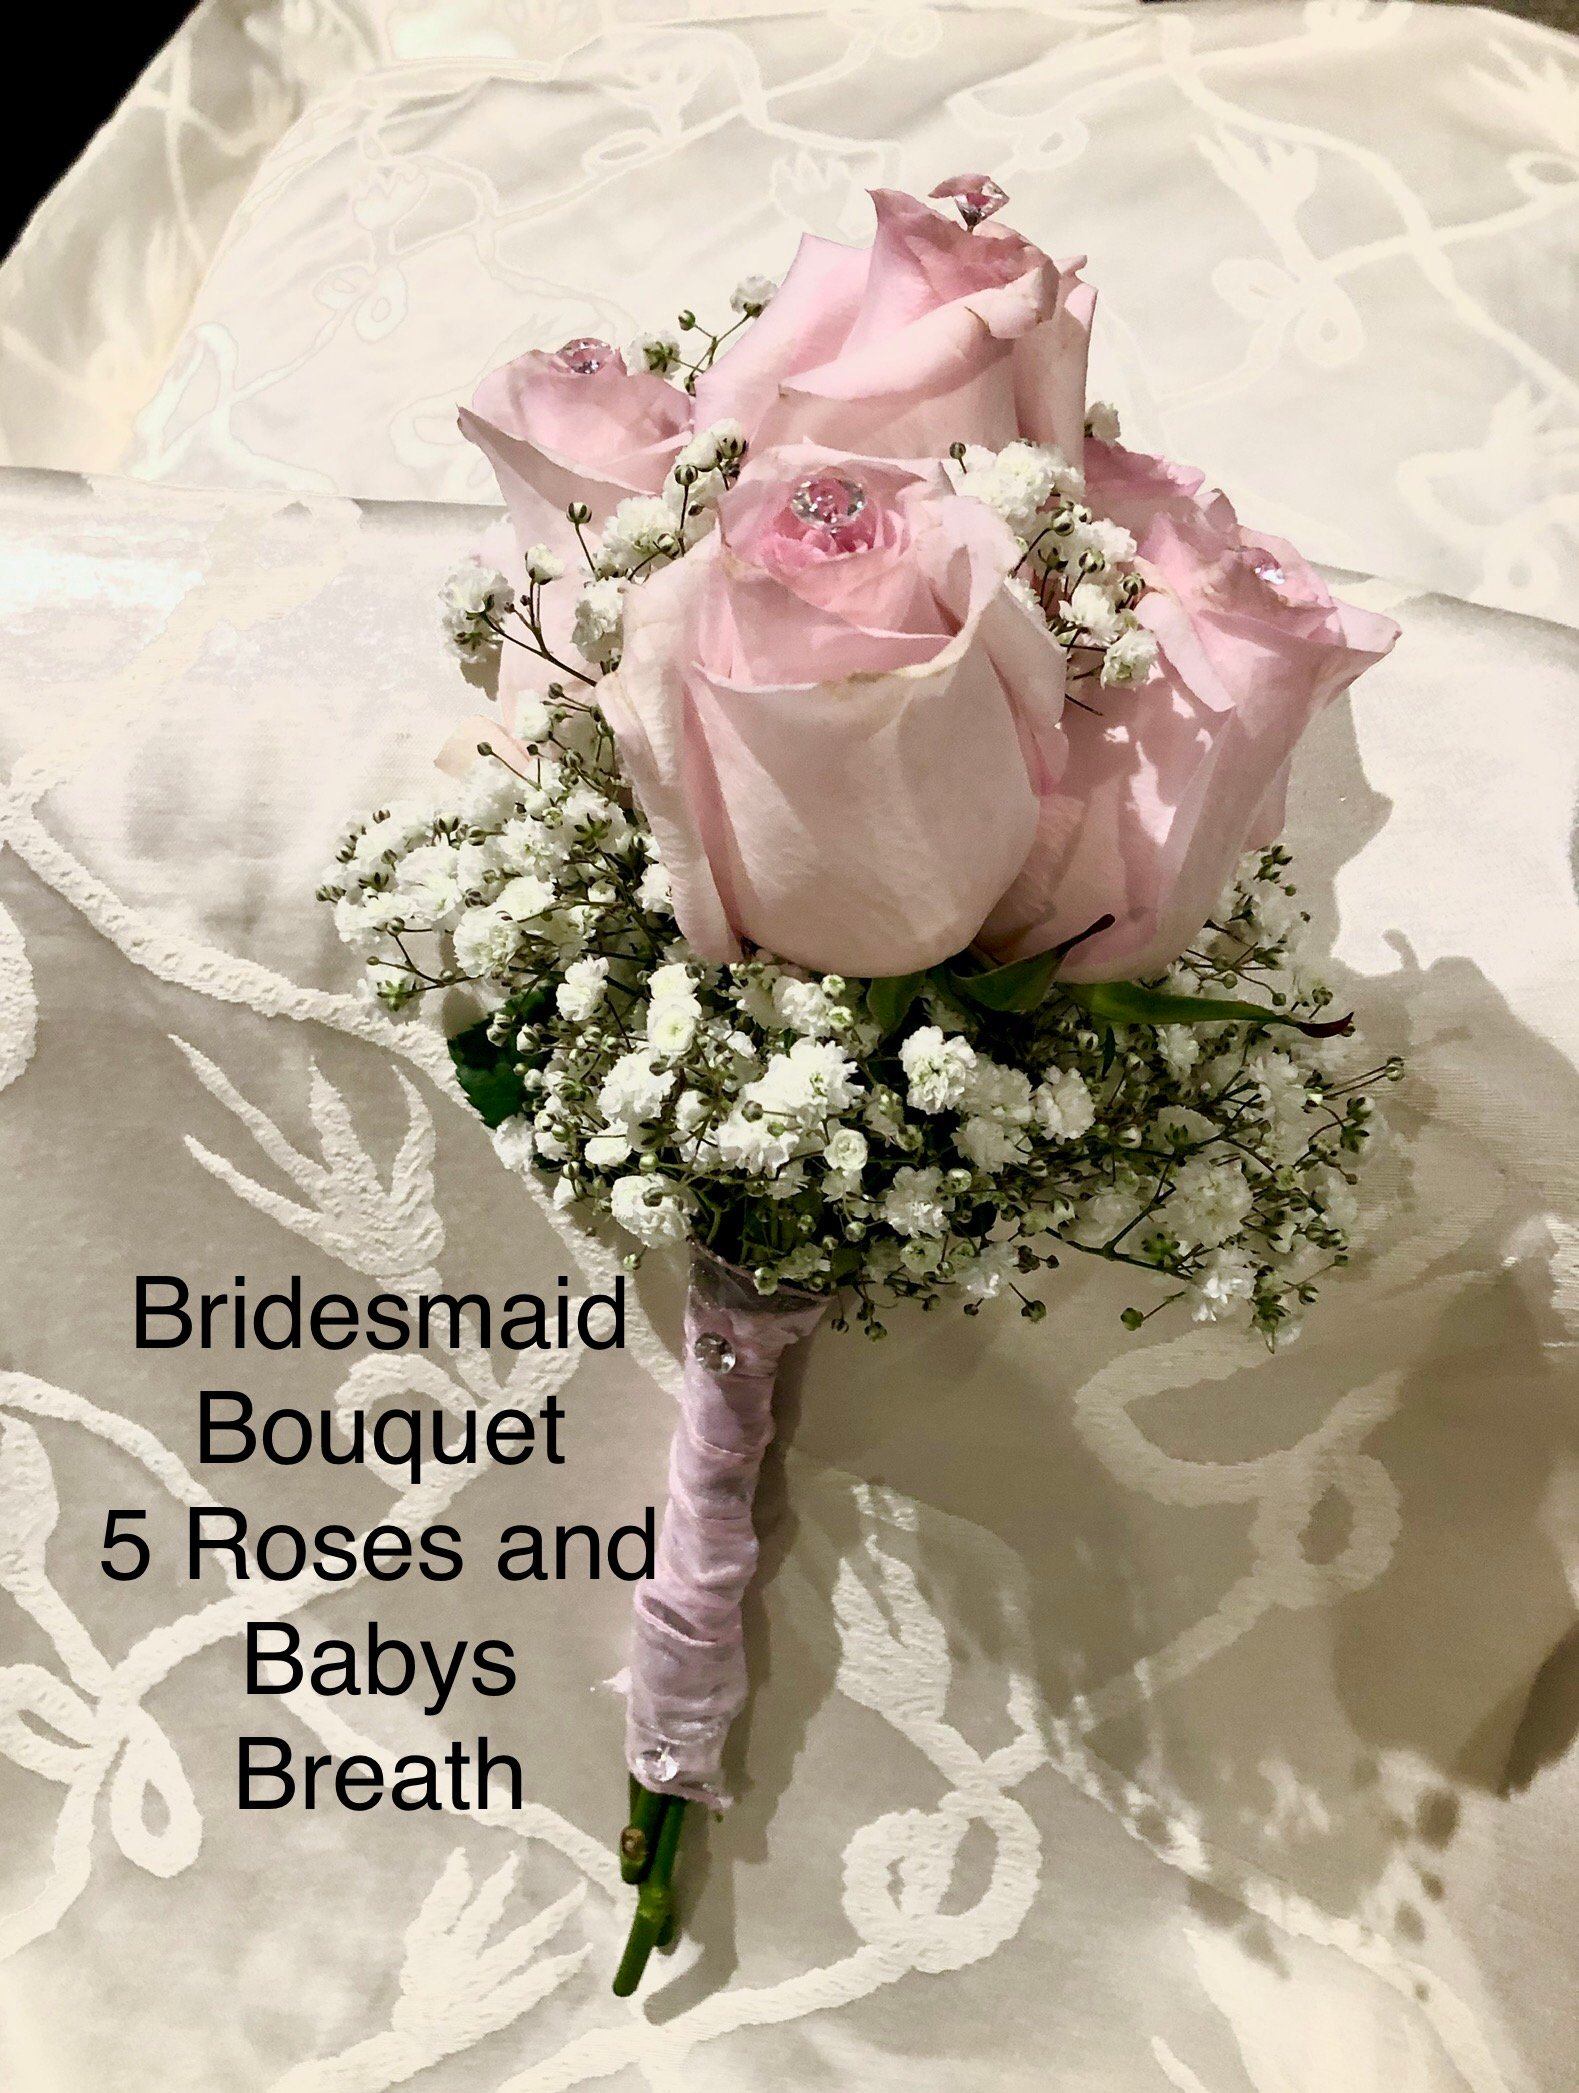 Bridesmaid Bouquet 5 Roses and Babies Breath 